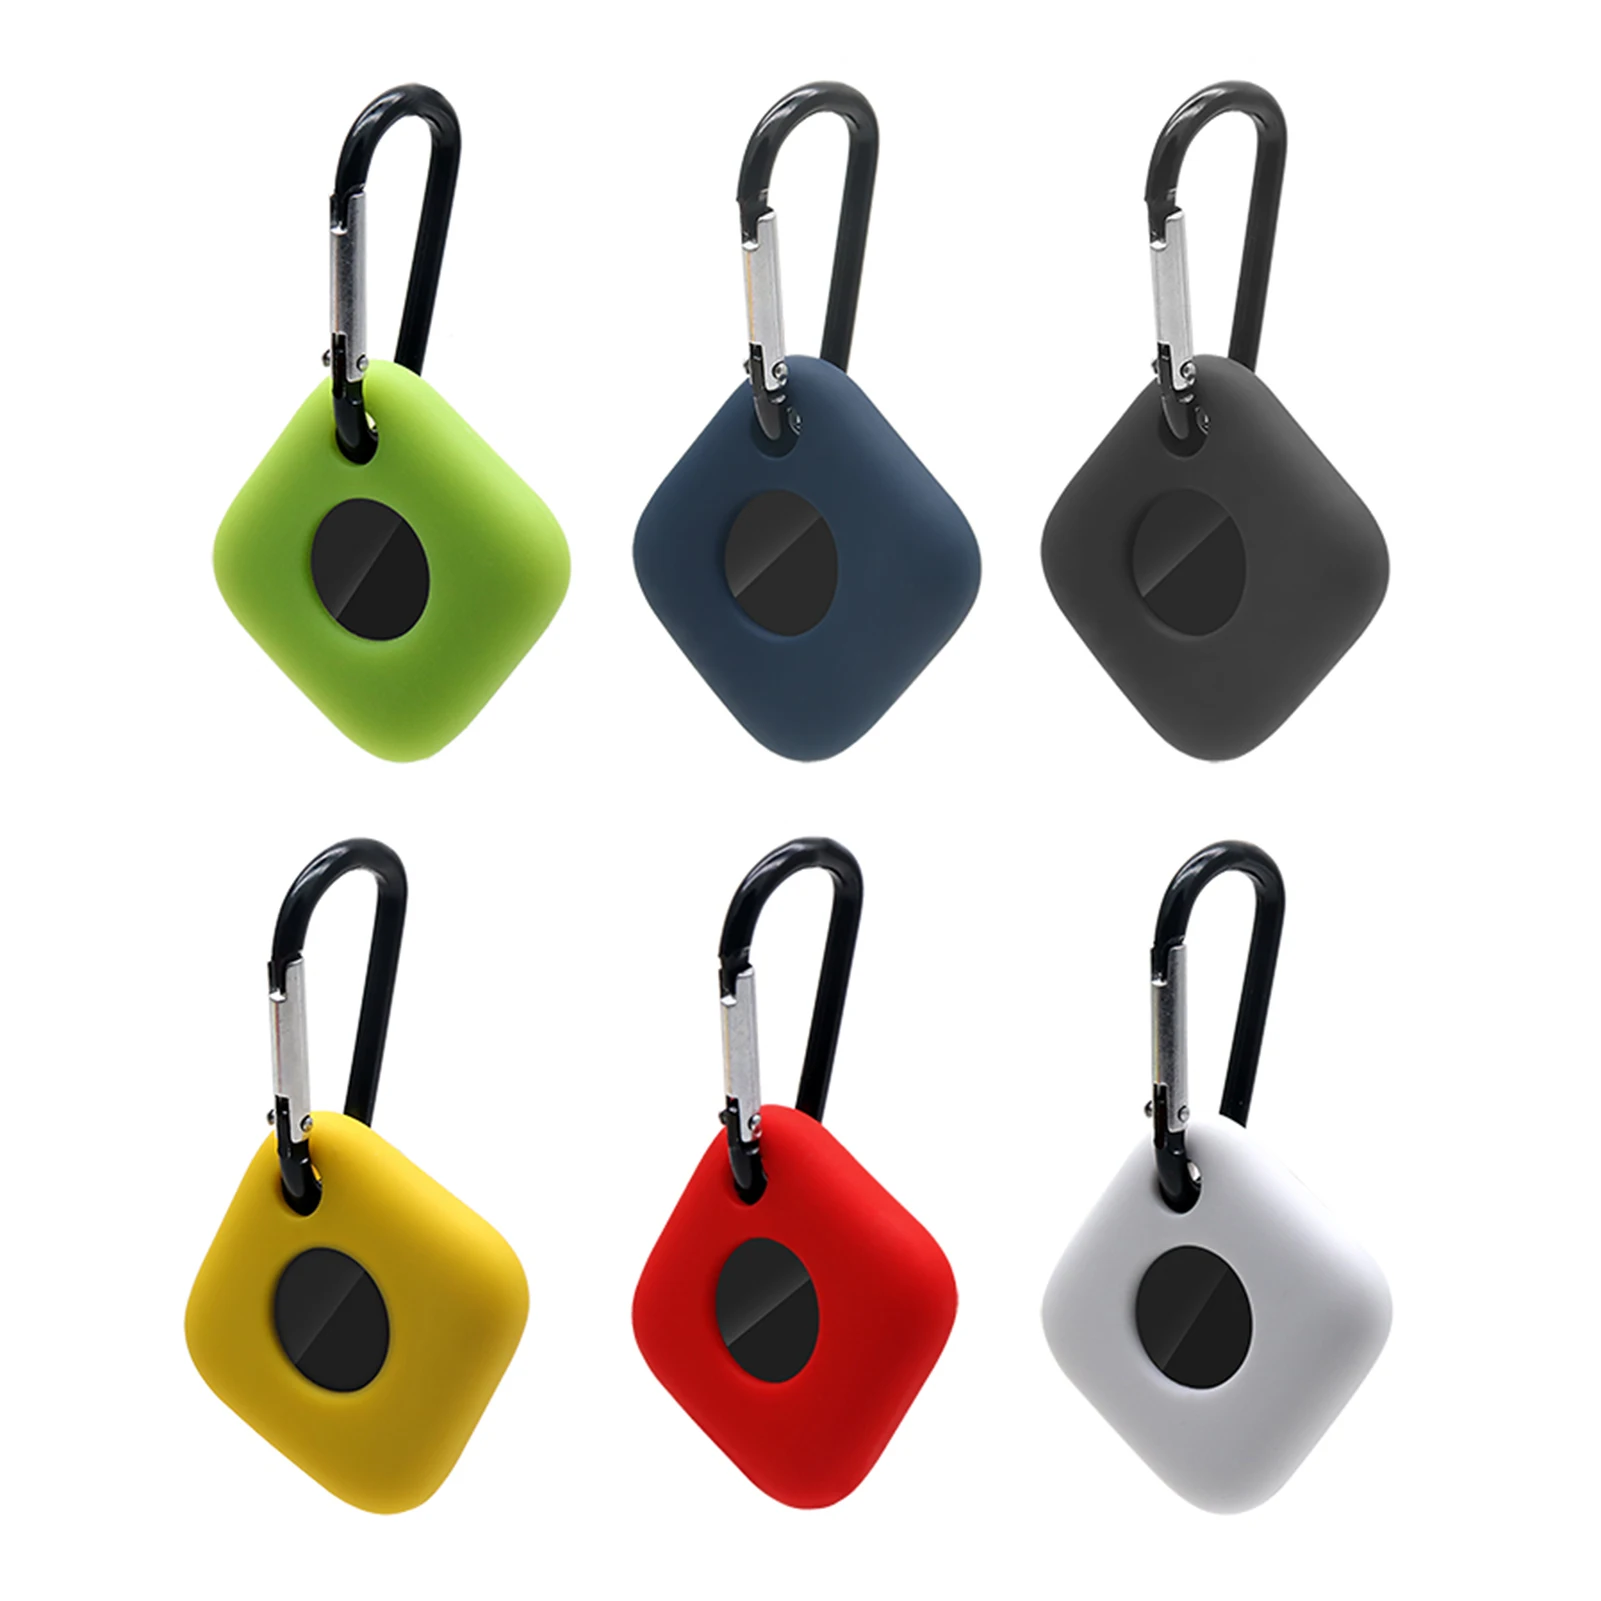  Tile Mate (2022), and Pet Collar Cambo, Bluetooth Tracker,  Locator; Up to 250 ft. Range. Up to 3 Year Battery. Water-Resistant. iOS  and Android Compatible. with a Silicone Pet Collar Necklace